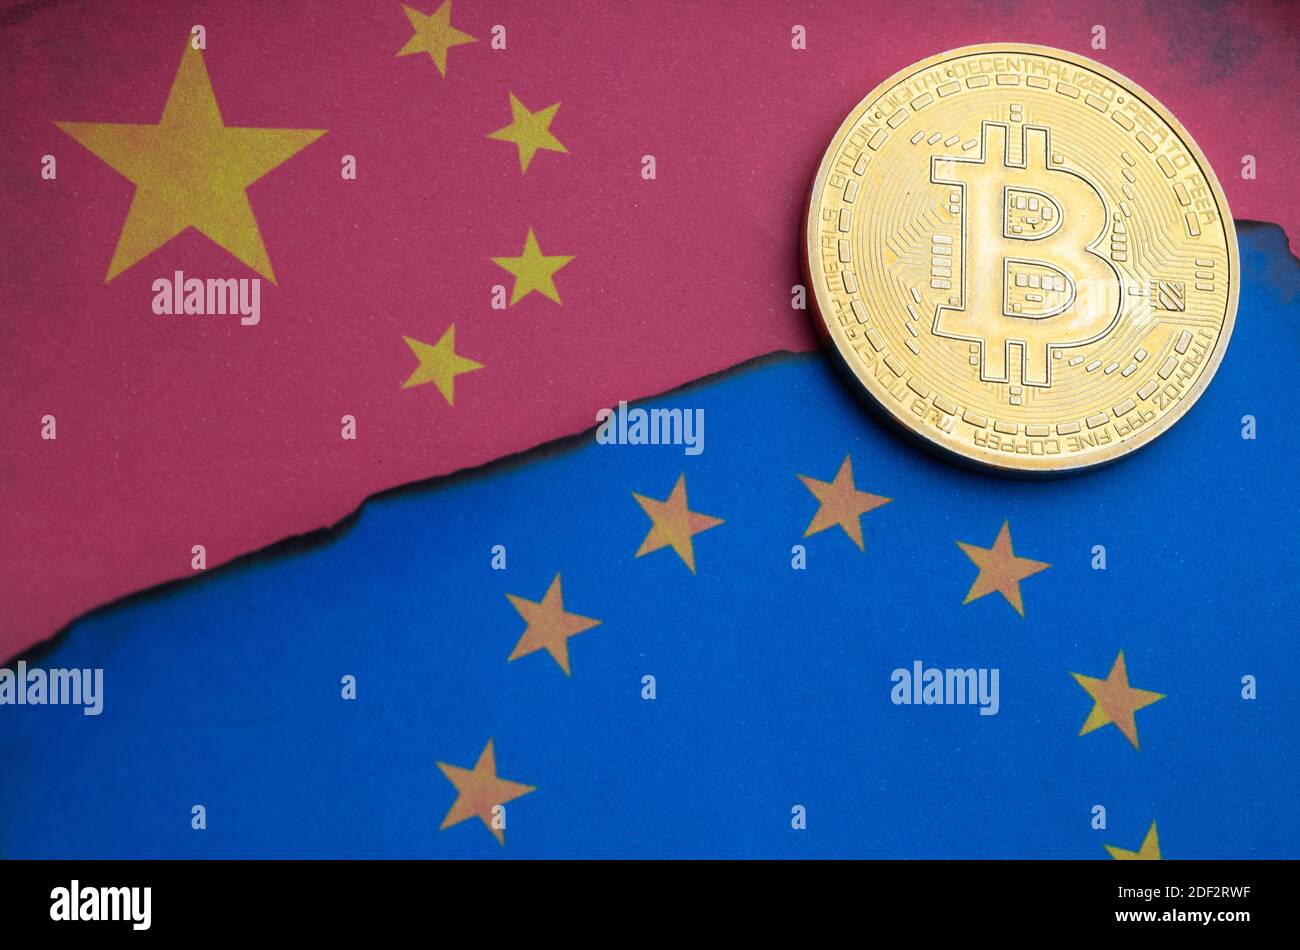 Bitcoin token ontop of flags of the European Union and china Stock Photo